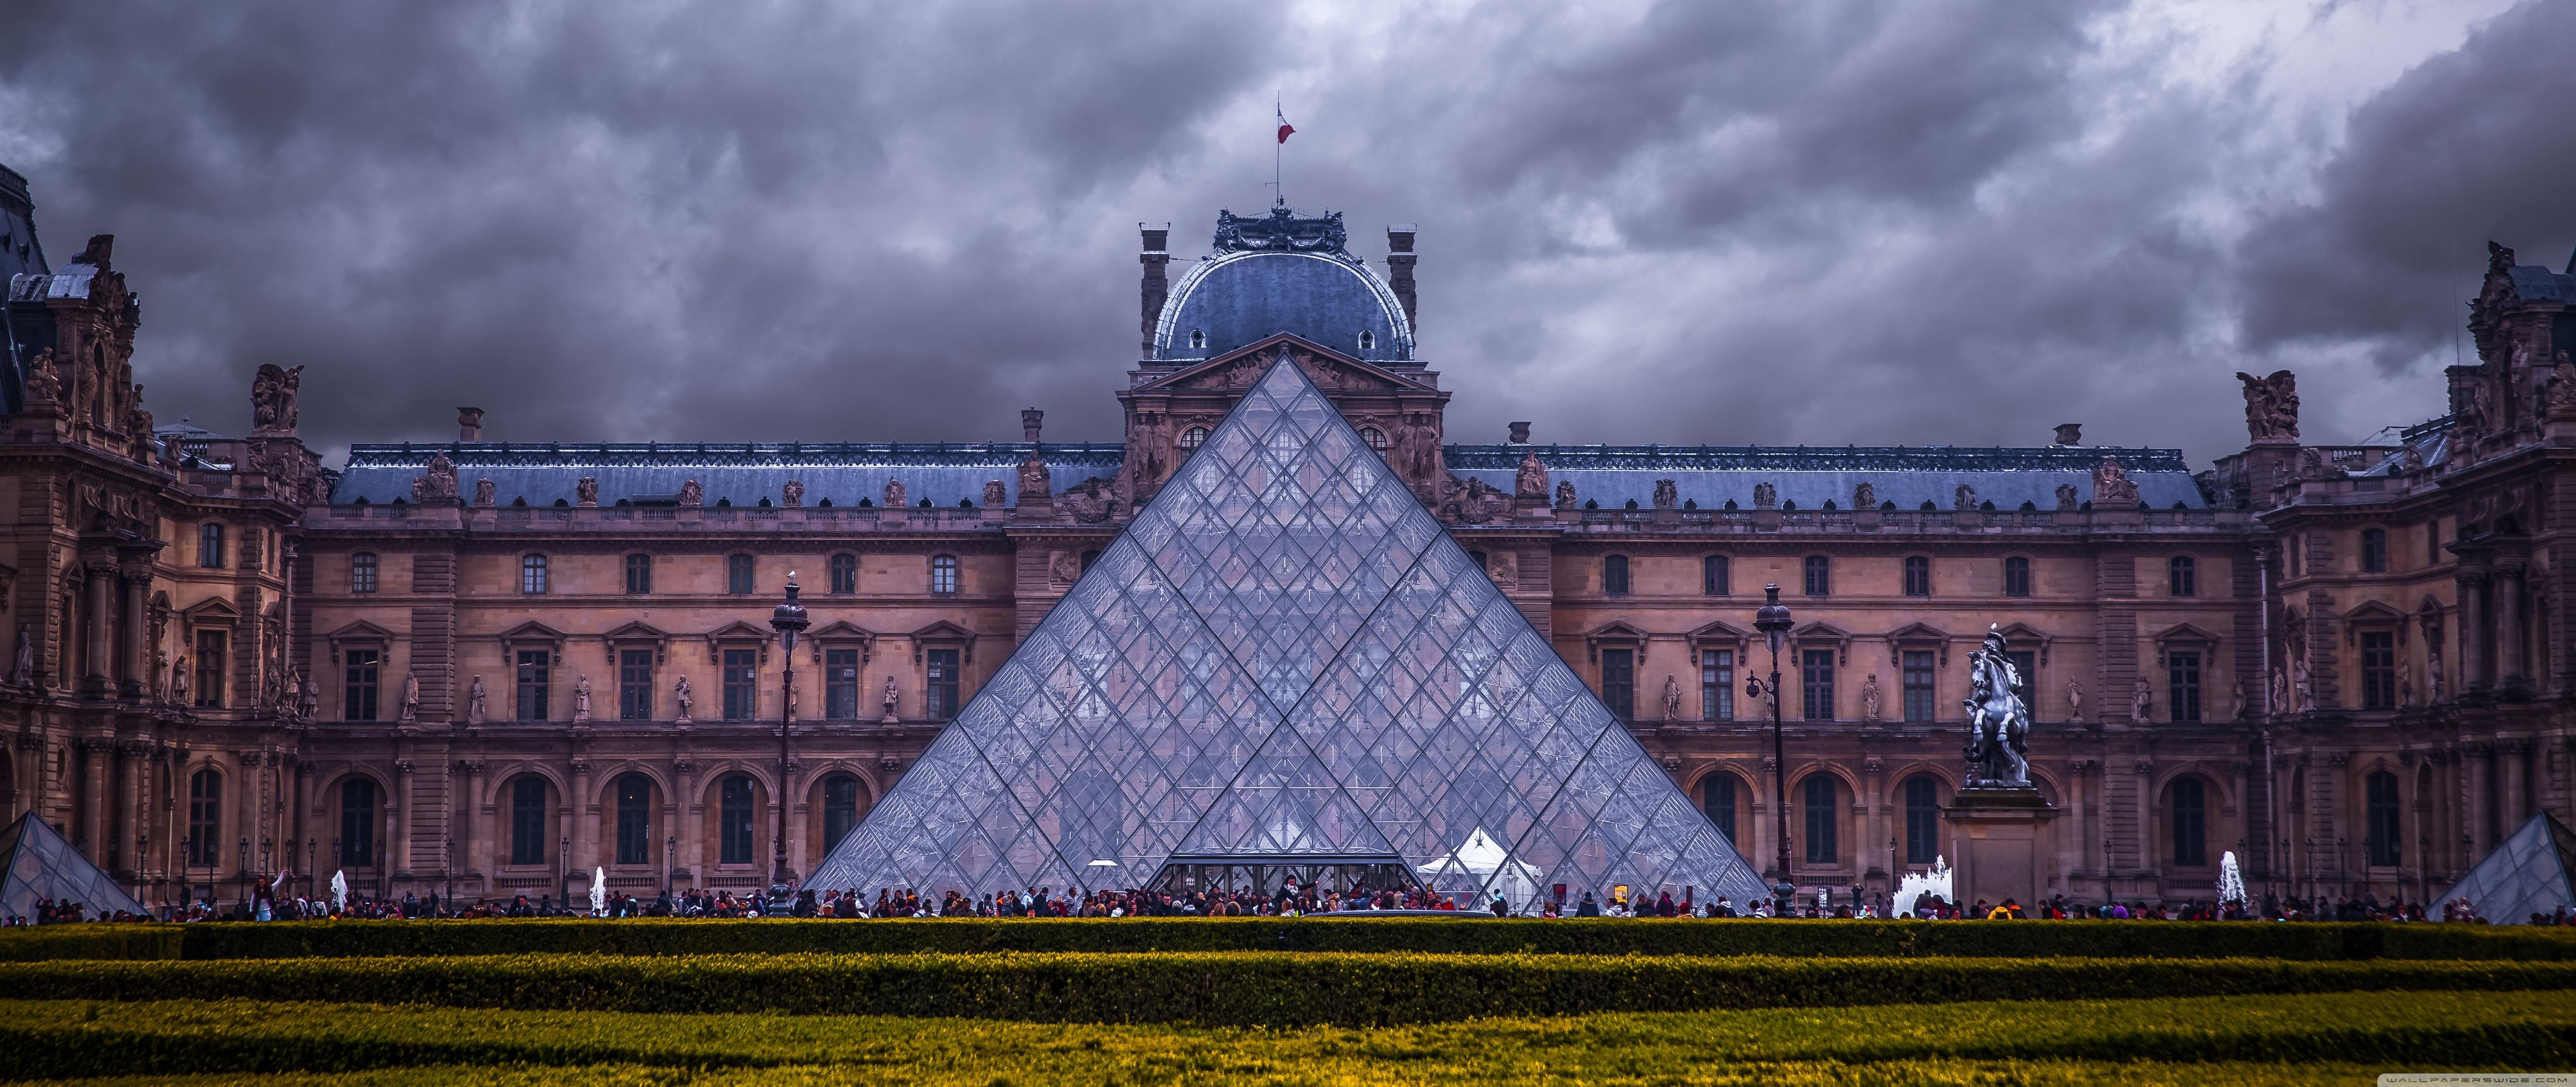 Free download Best Louvre palace in paris Wallpaper 8 Image